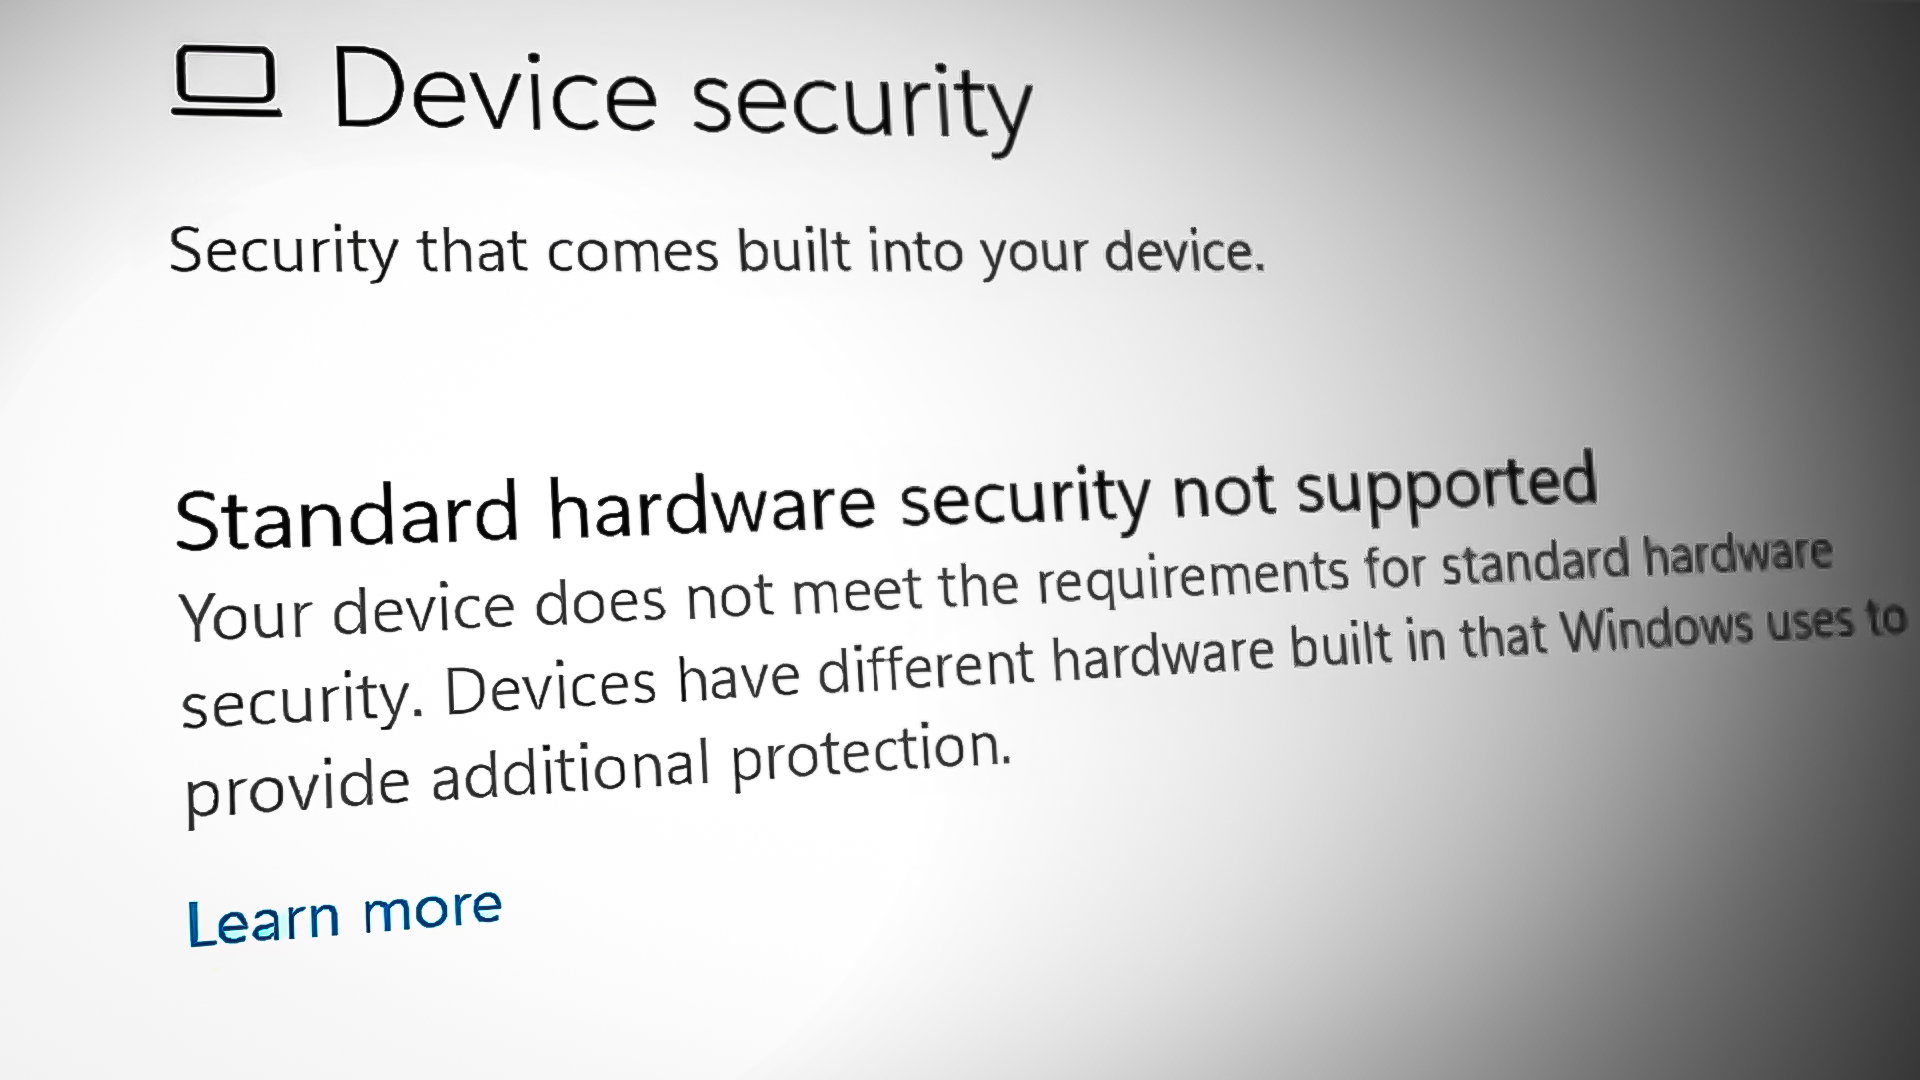 Standard Hardware Security Not Supported